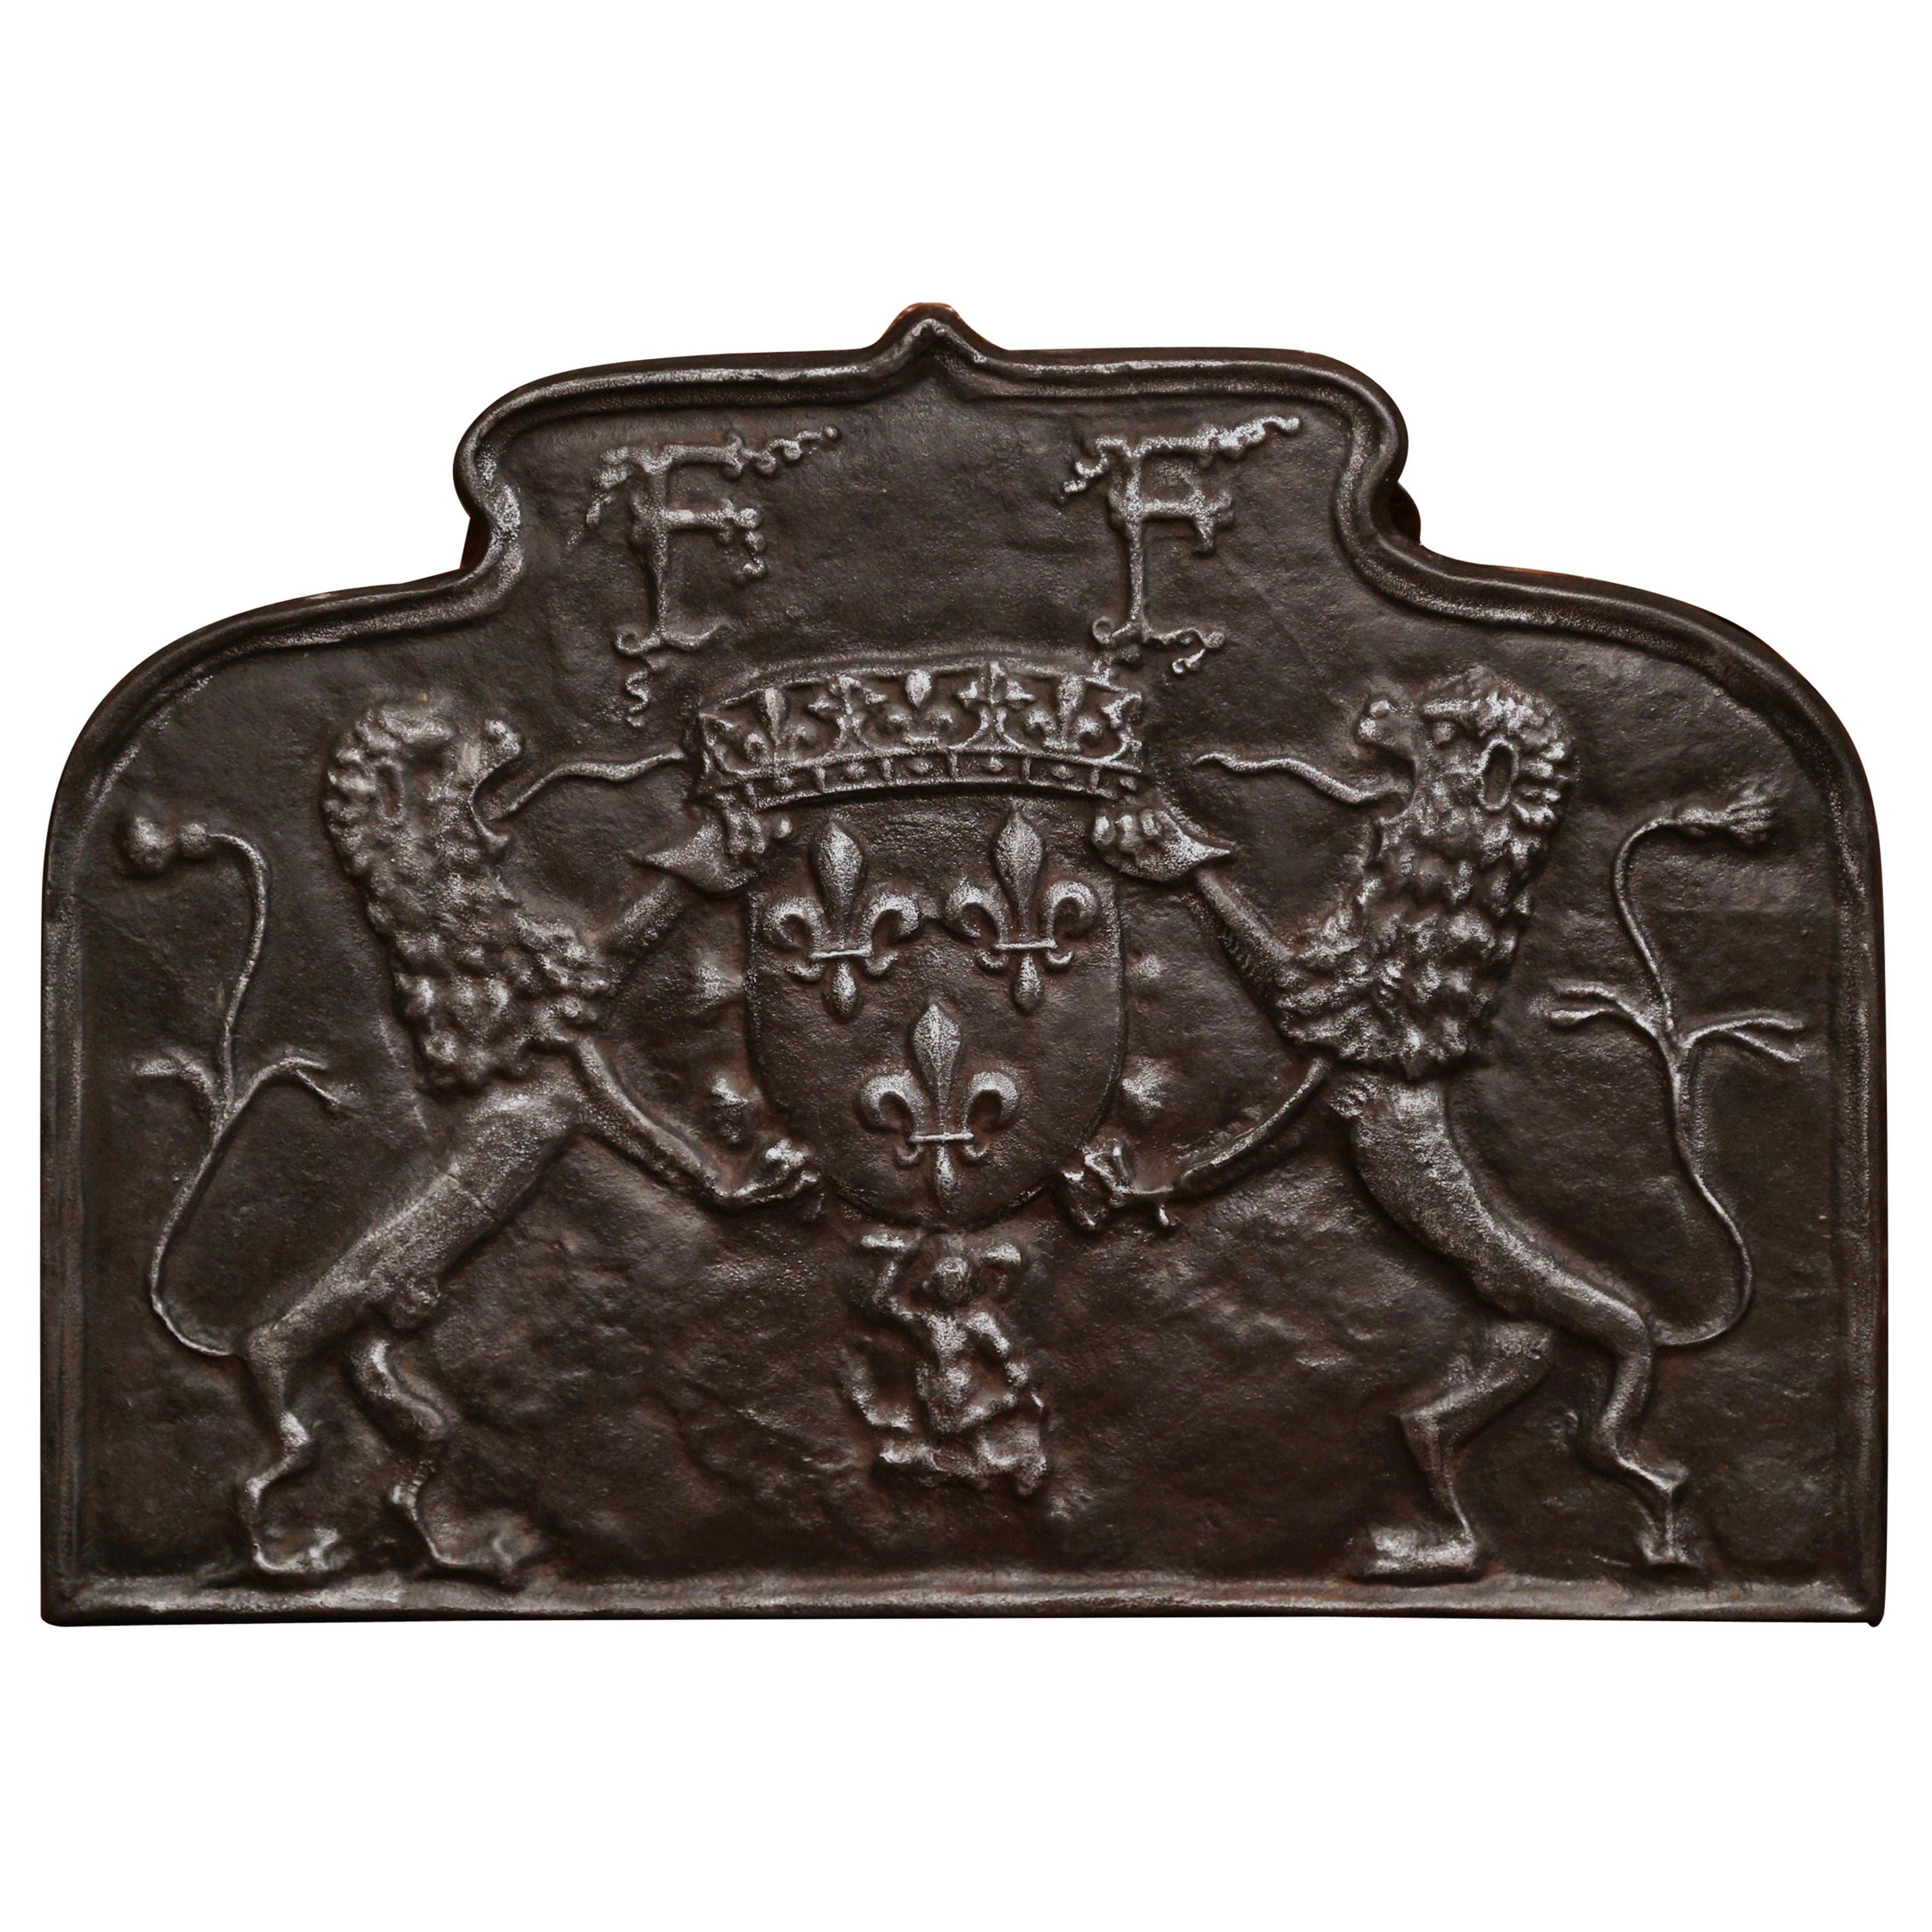 18th Century French Iron Fireback with Coat of Arms and Fleurs de Lys